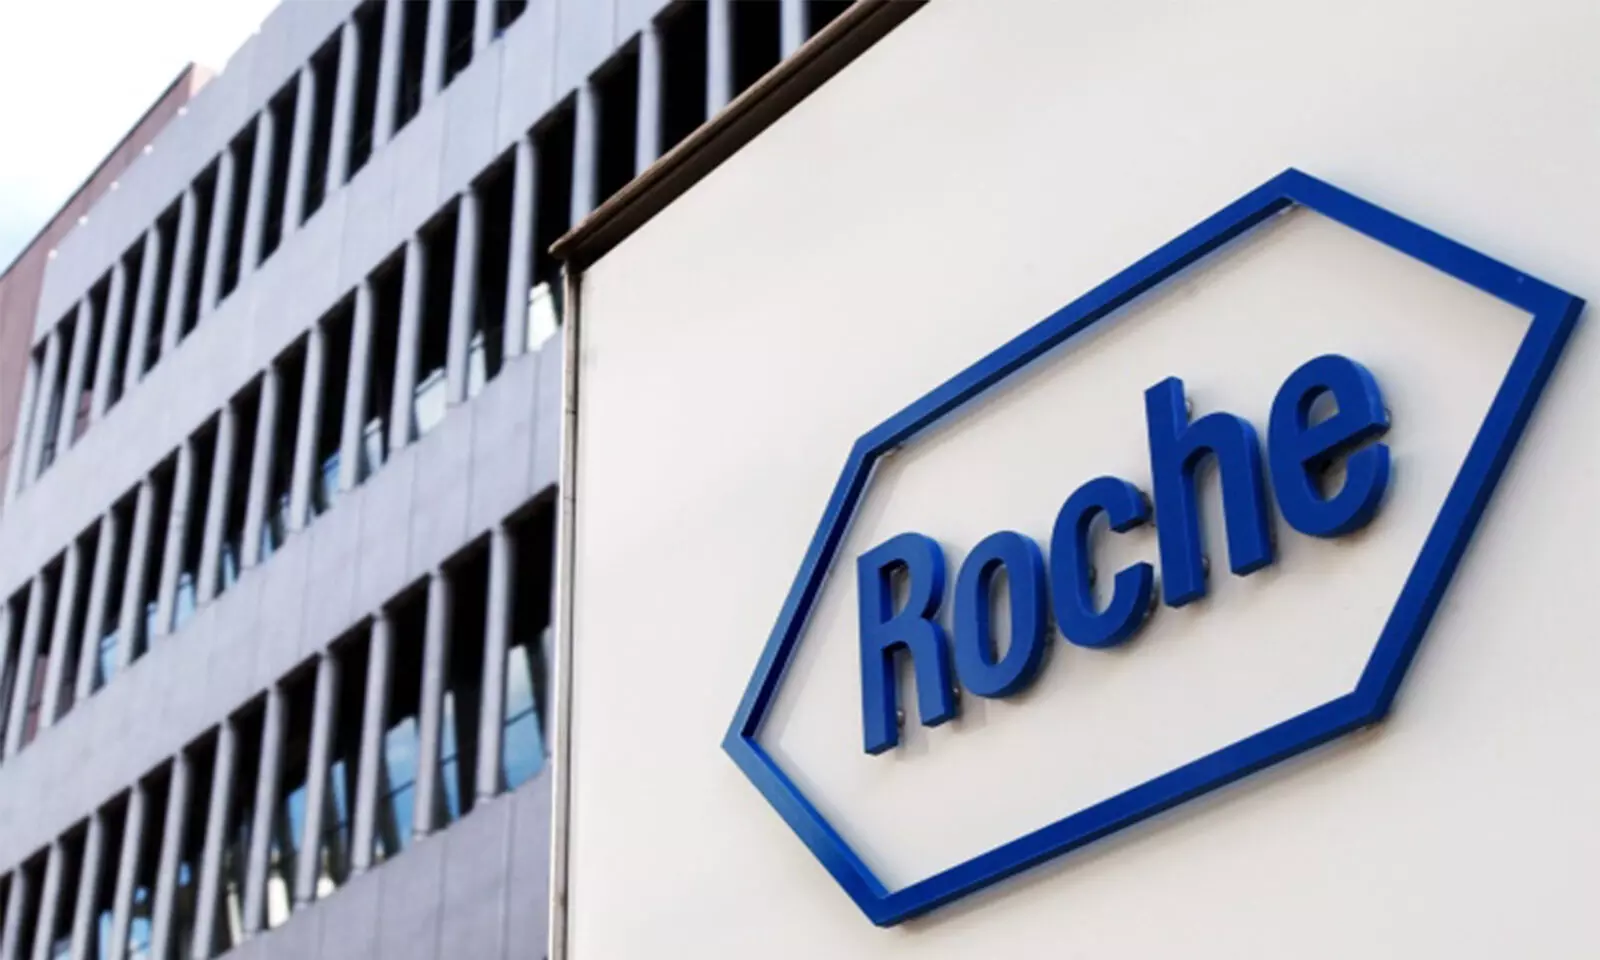 Roche Diabetes Care India unveils ACCU-FINE pen needles for virtually painless insulin delivery